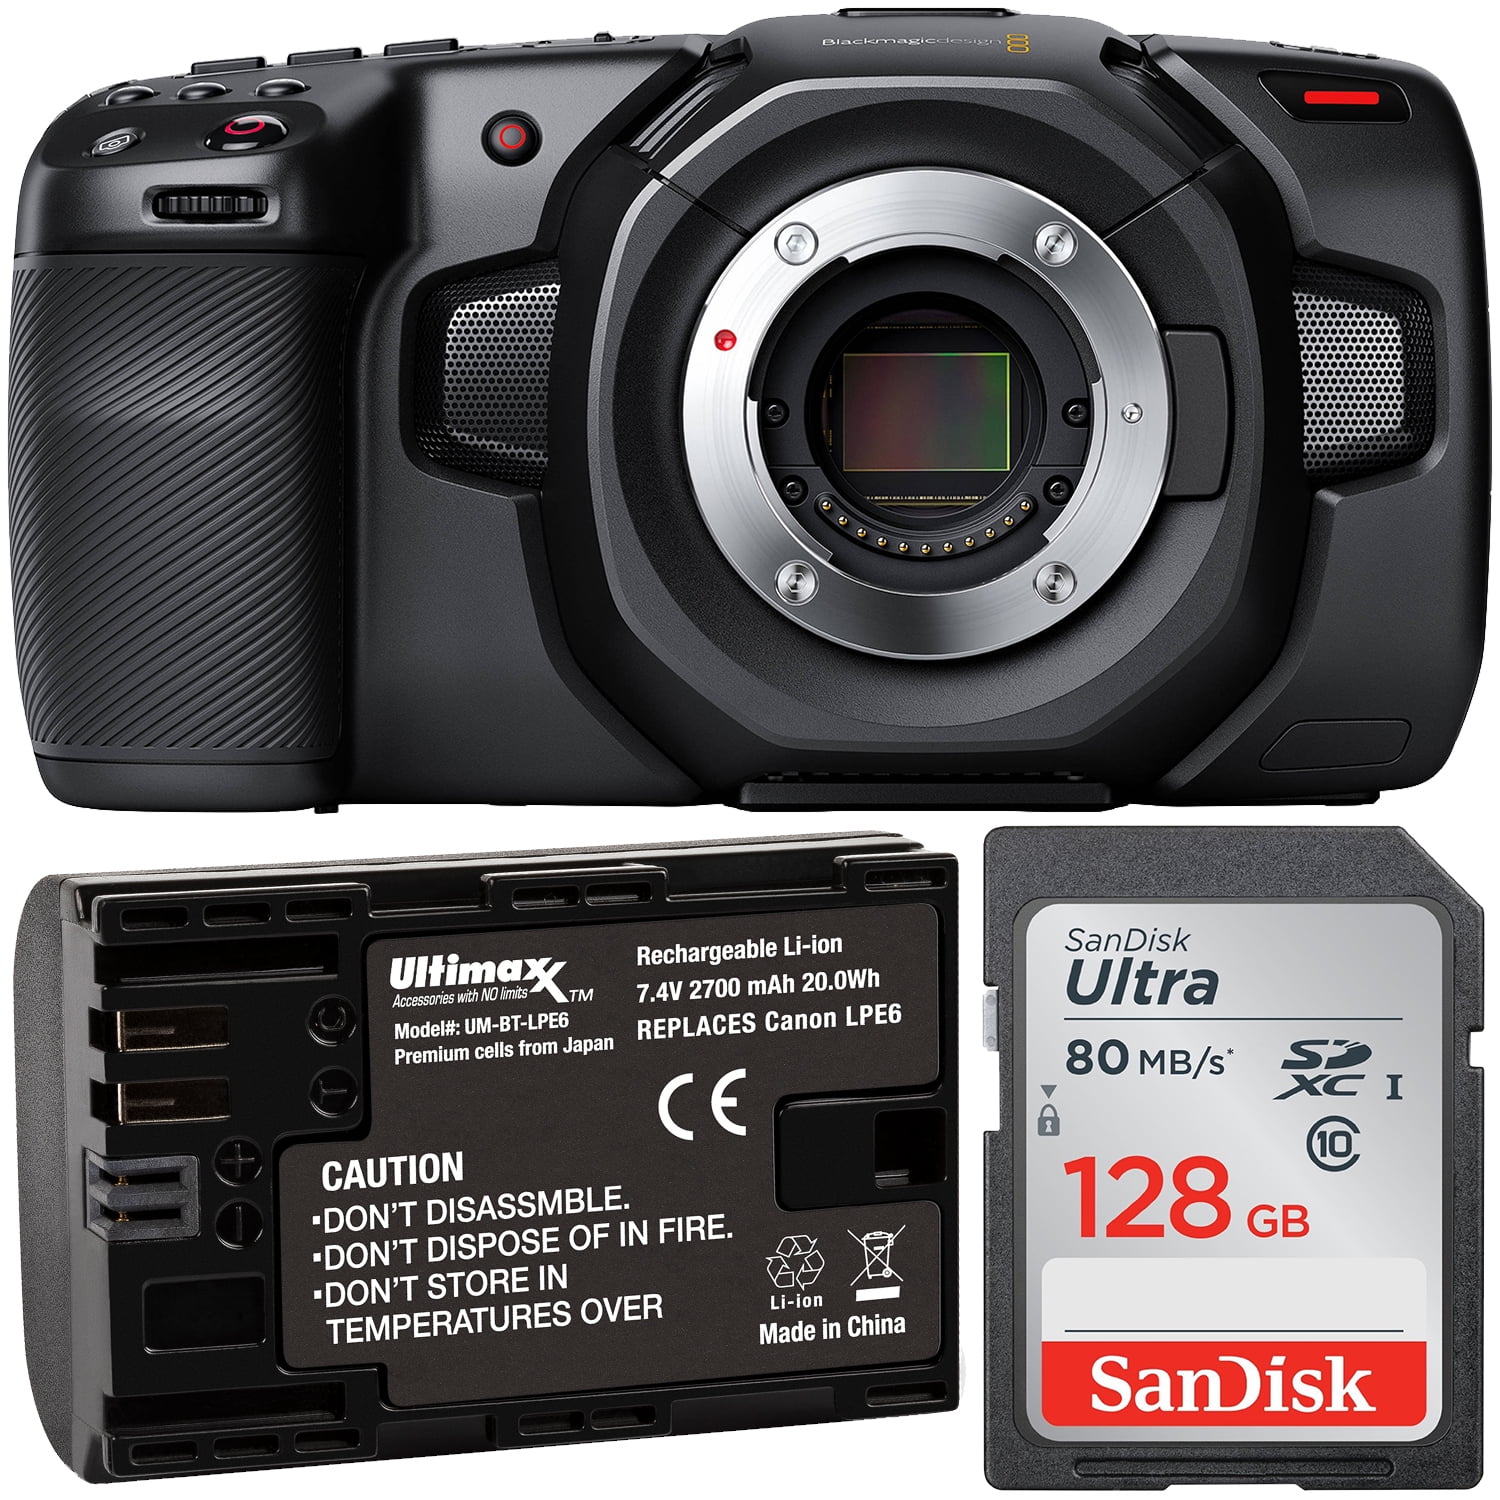  Blackmagic Design Pocket Cinema Camera 4K - Bundled with  SanDisk 128GB SDXC Memory Card, and Extra Green Extreme LP-E6N Rechargeable  Lithium-Ion Battery Pack and USB Charger : Electronics